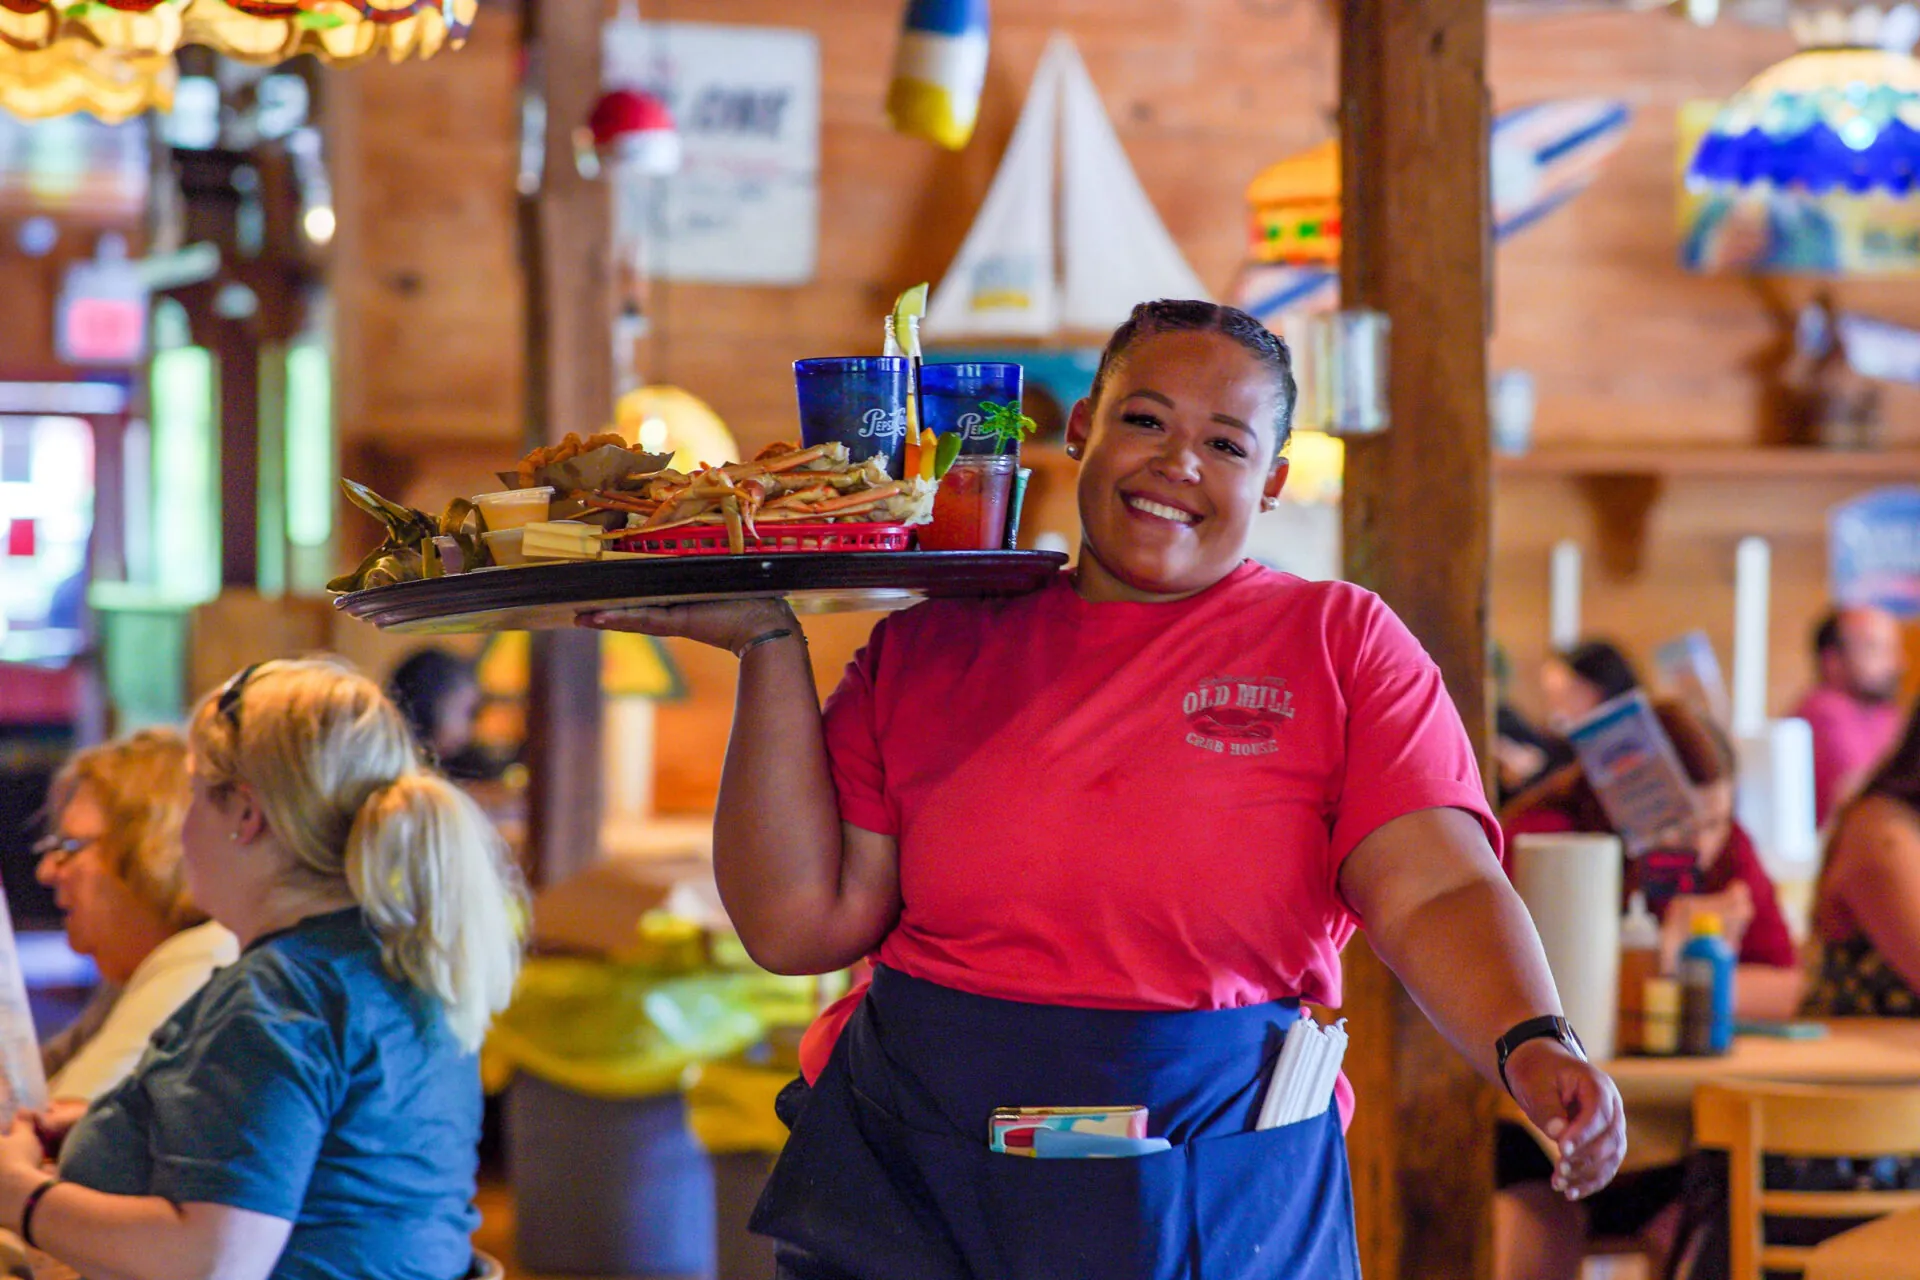 a woman carrying a tray of food in a restaurant